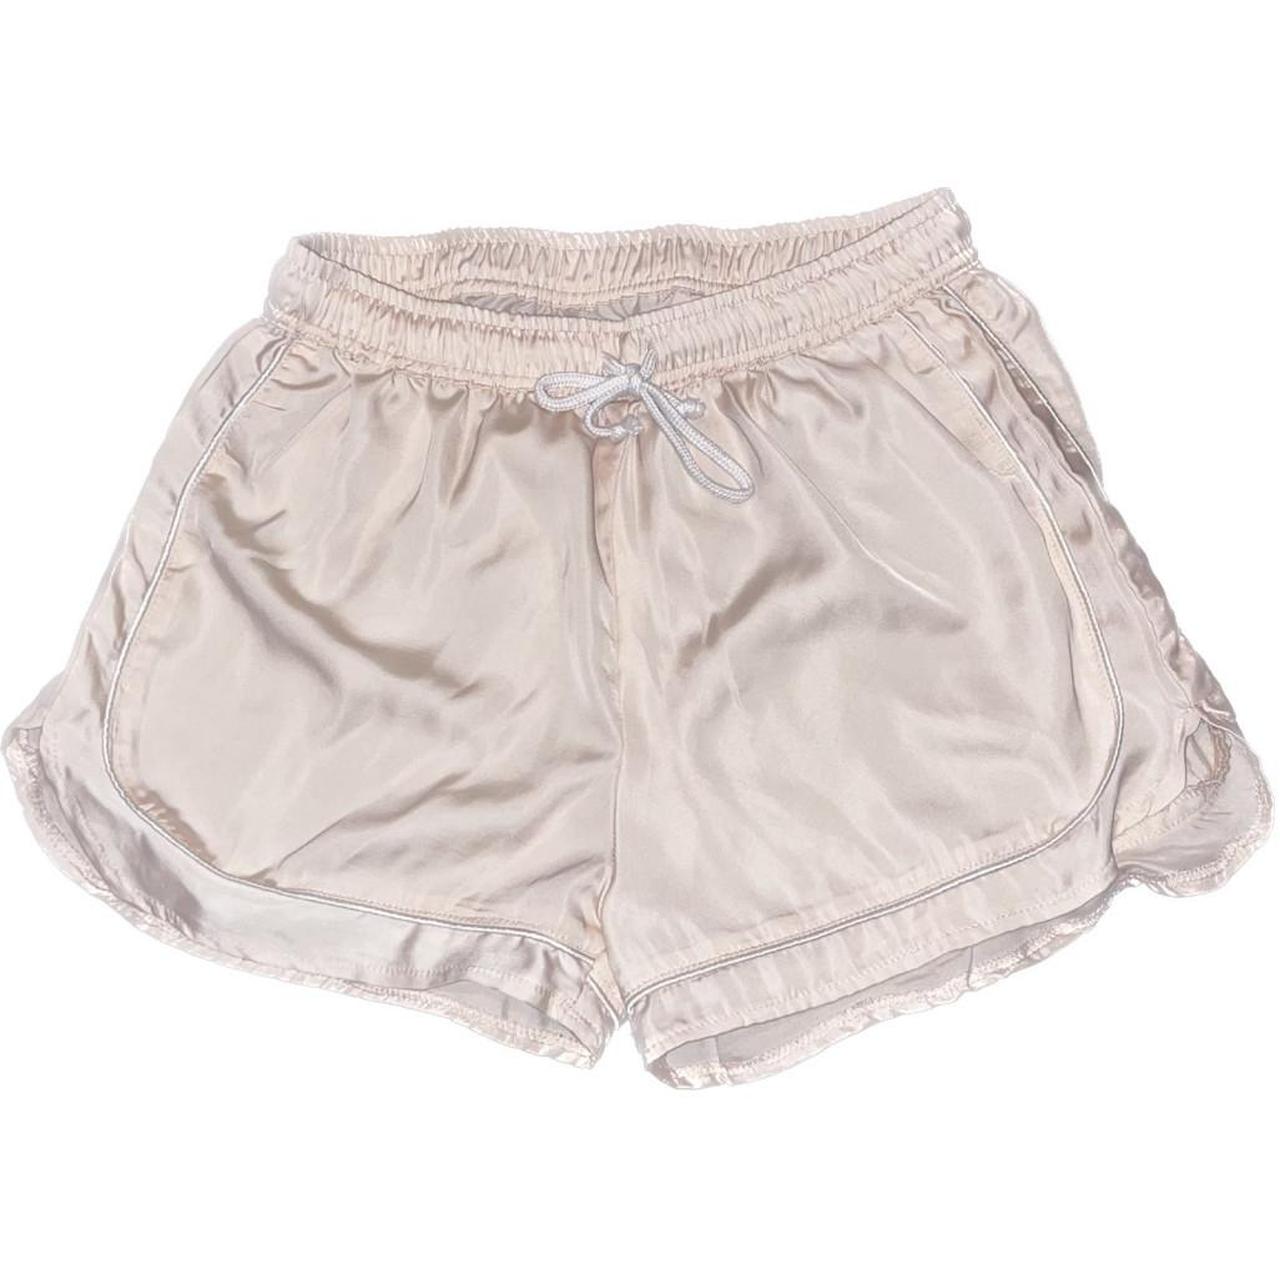 IVORY SATIN RUNNING SHORTS Size small Great... - Depop